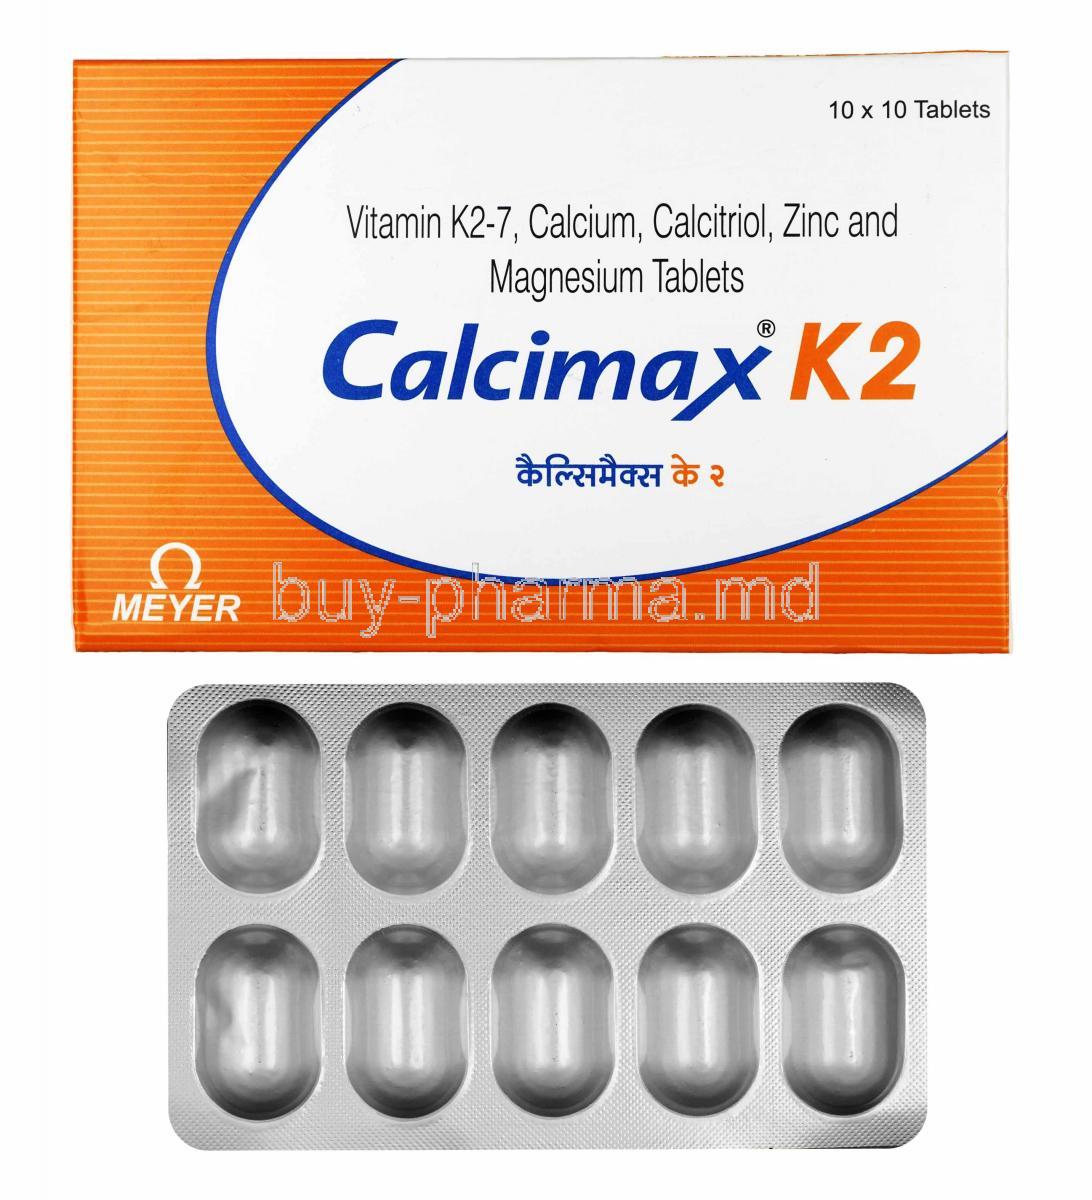 Calcimax K2 box and tablets